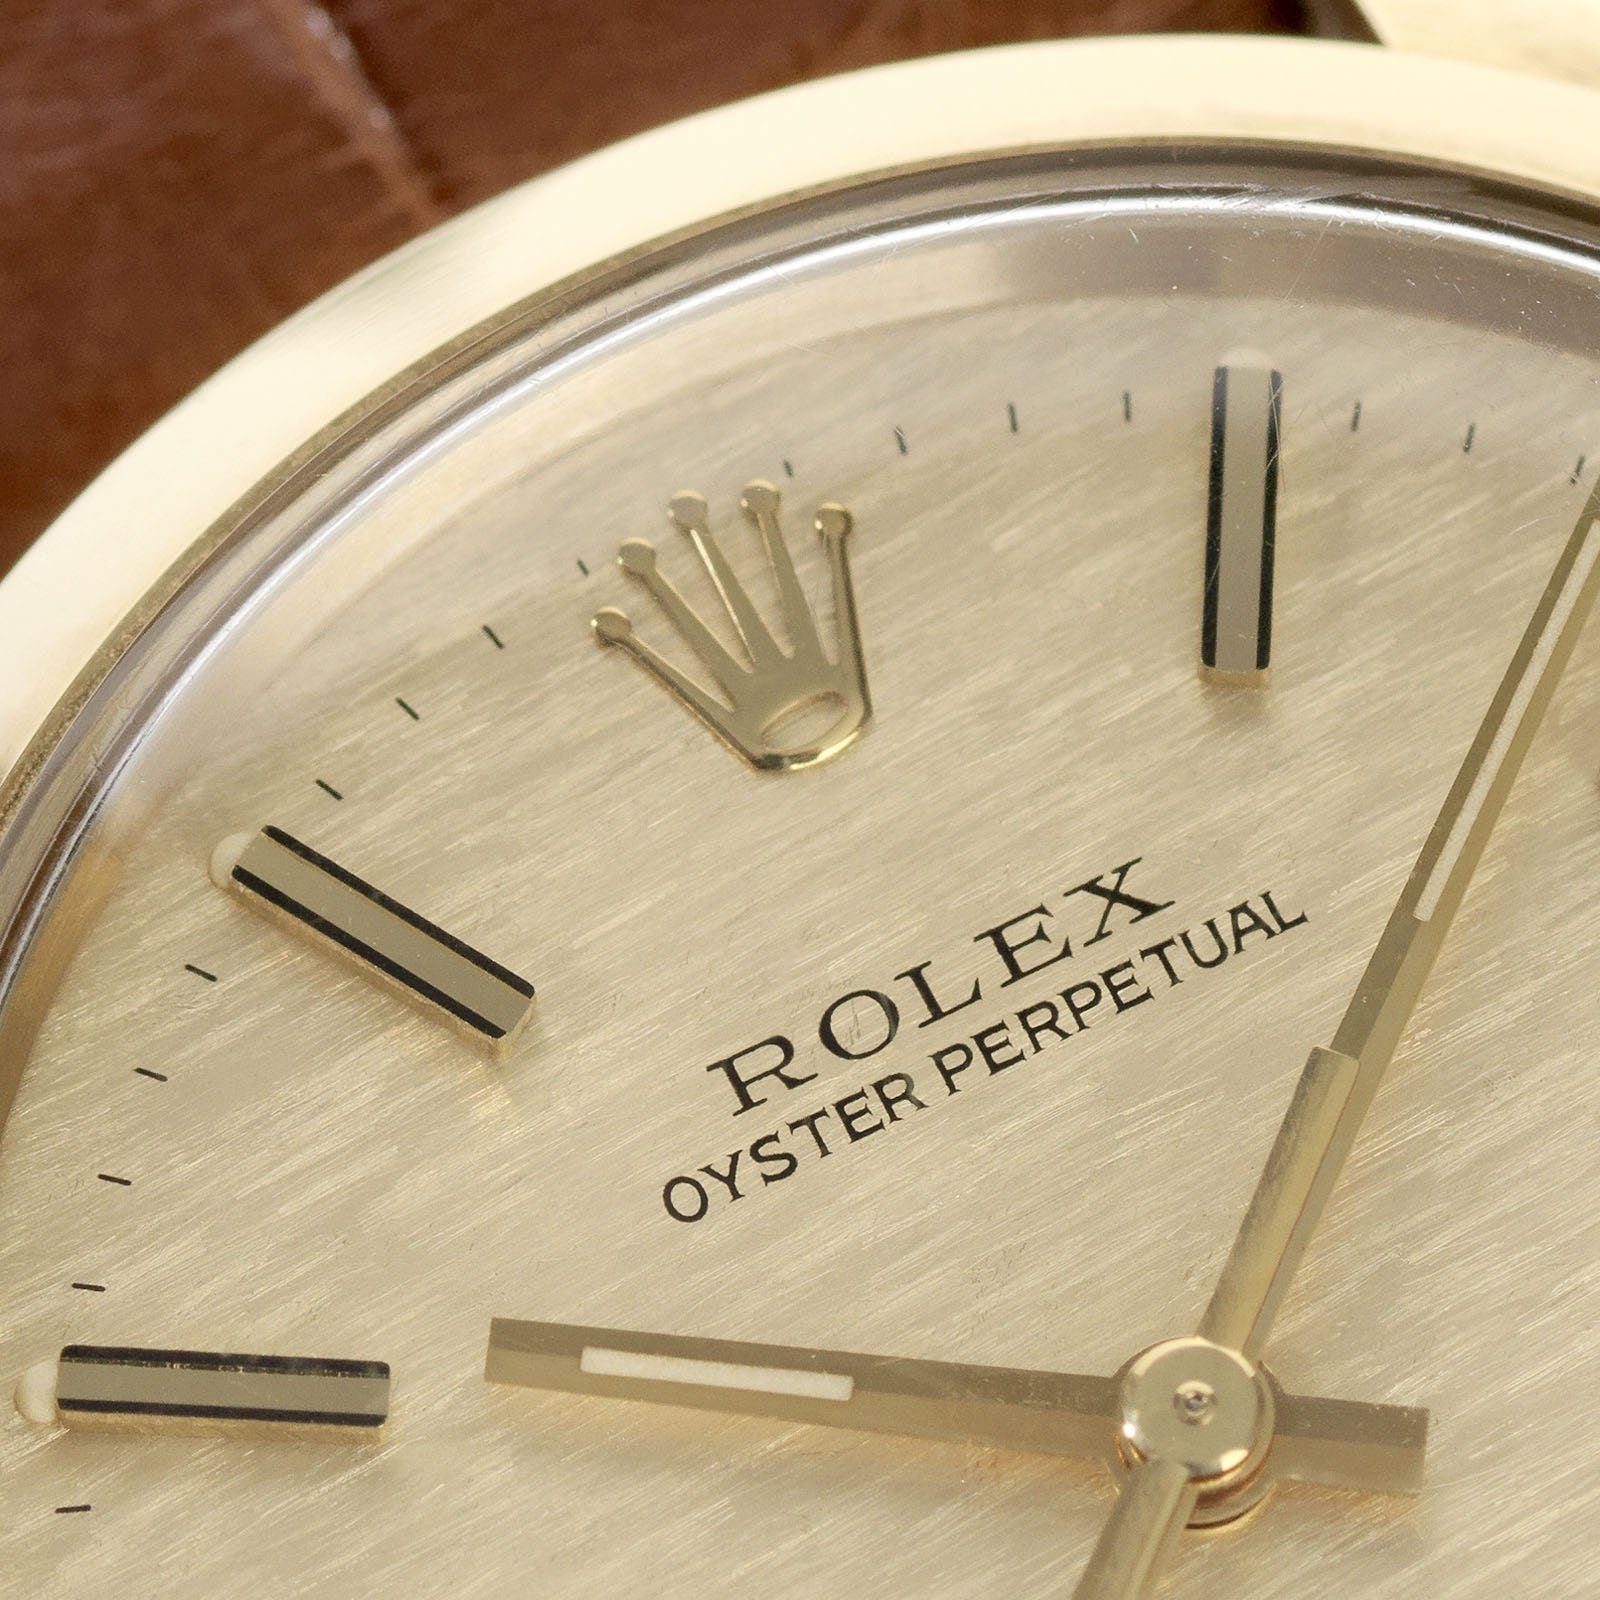 Rolex Oyster Perpetual Yellow Gold ref 1002